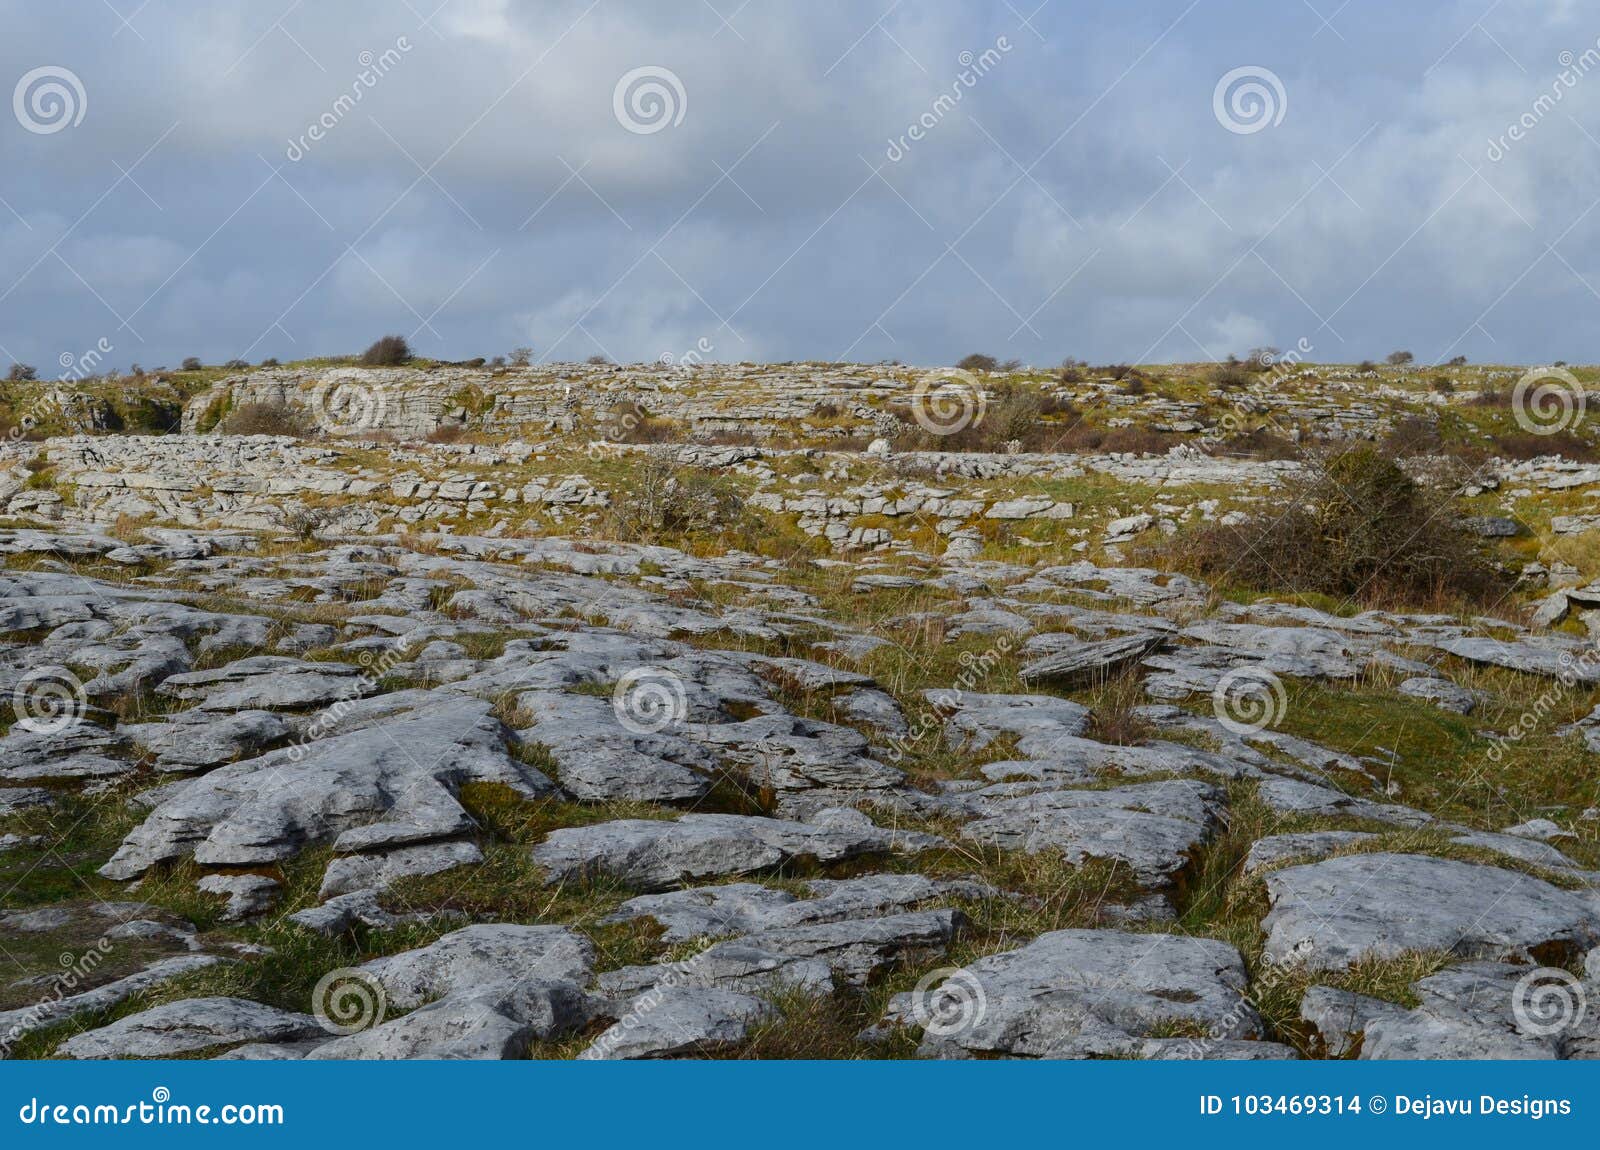 beautiful landscape in burren with rocky fields and blue skies